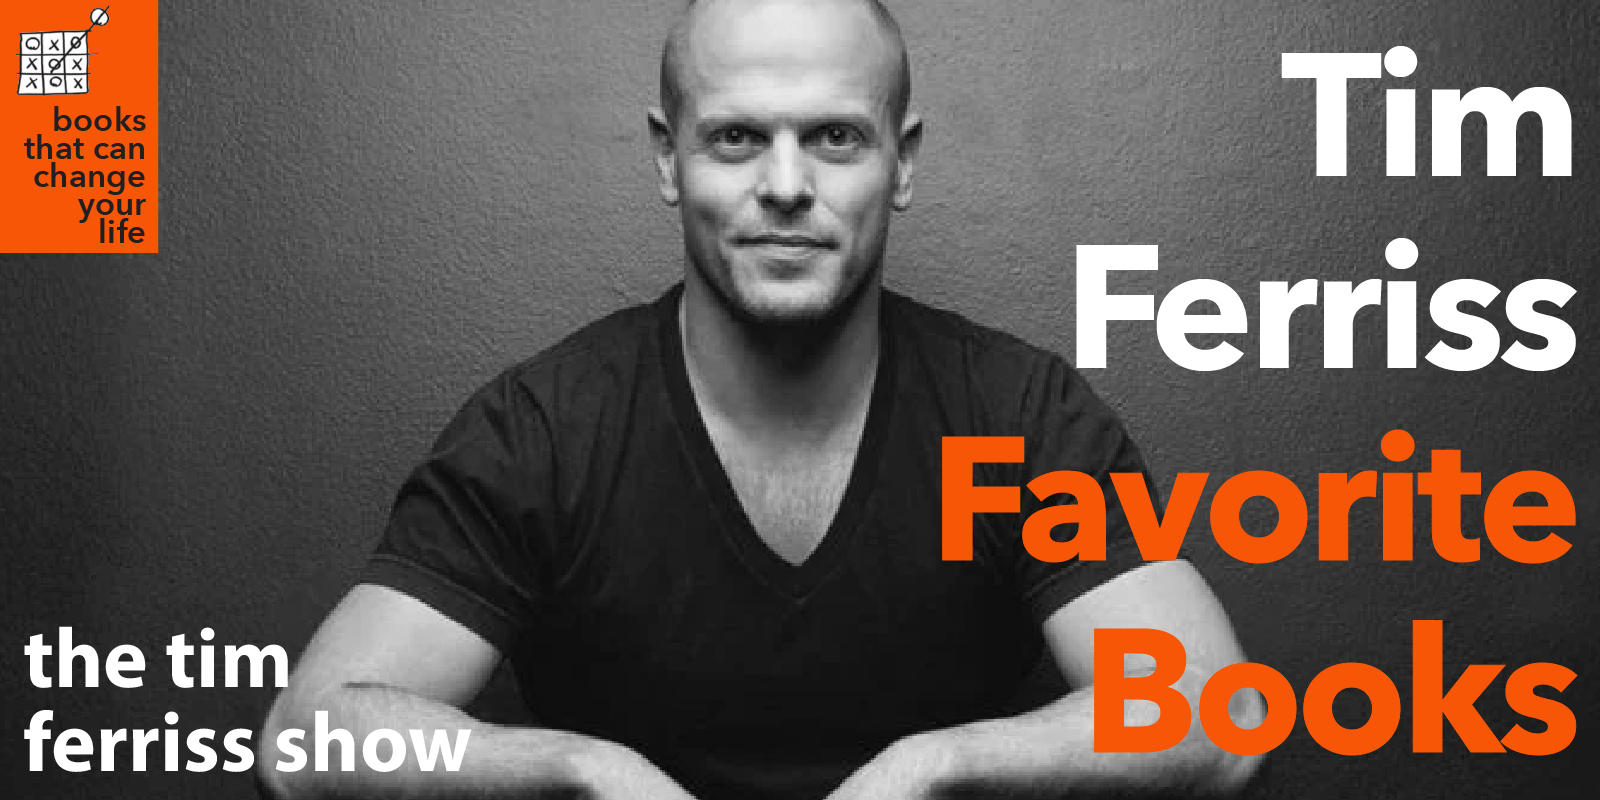 Tim Ferriss book recommendations and favorite books featured image